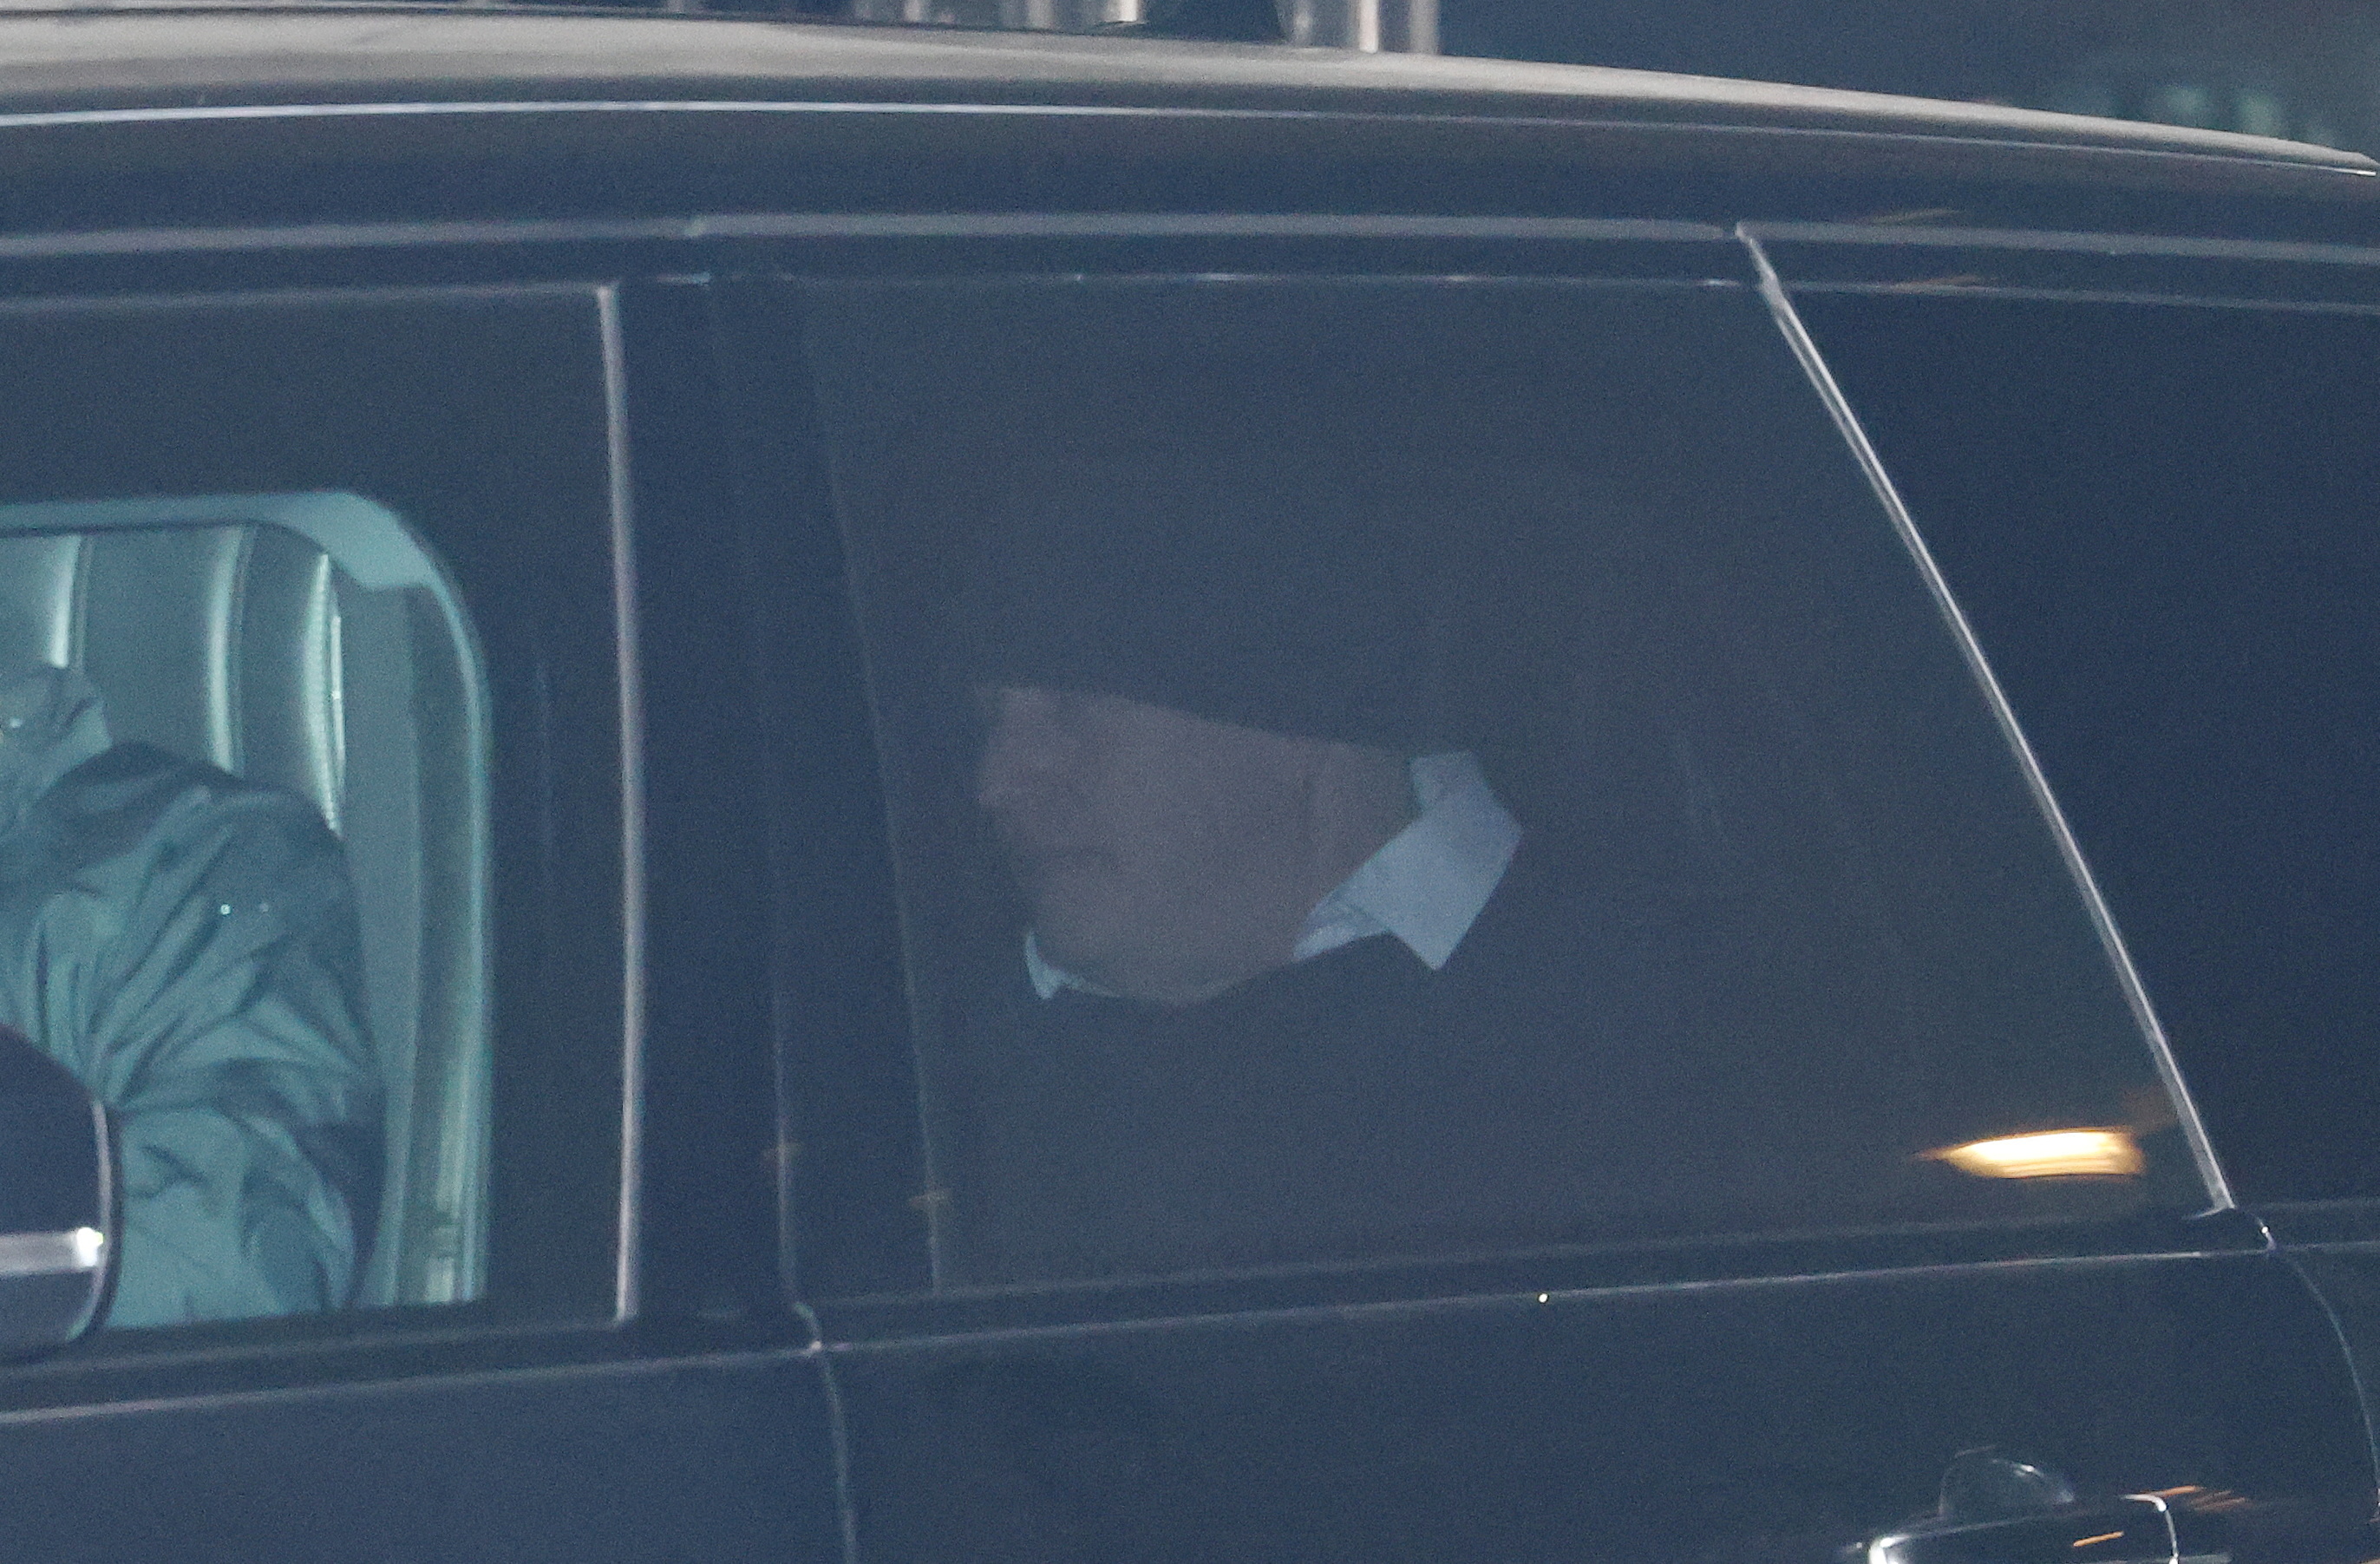 British Prime Minister Boris Johnson is driven away from Downing Street in London